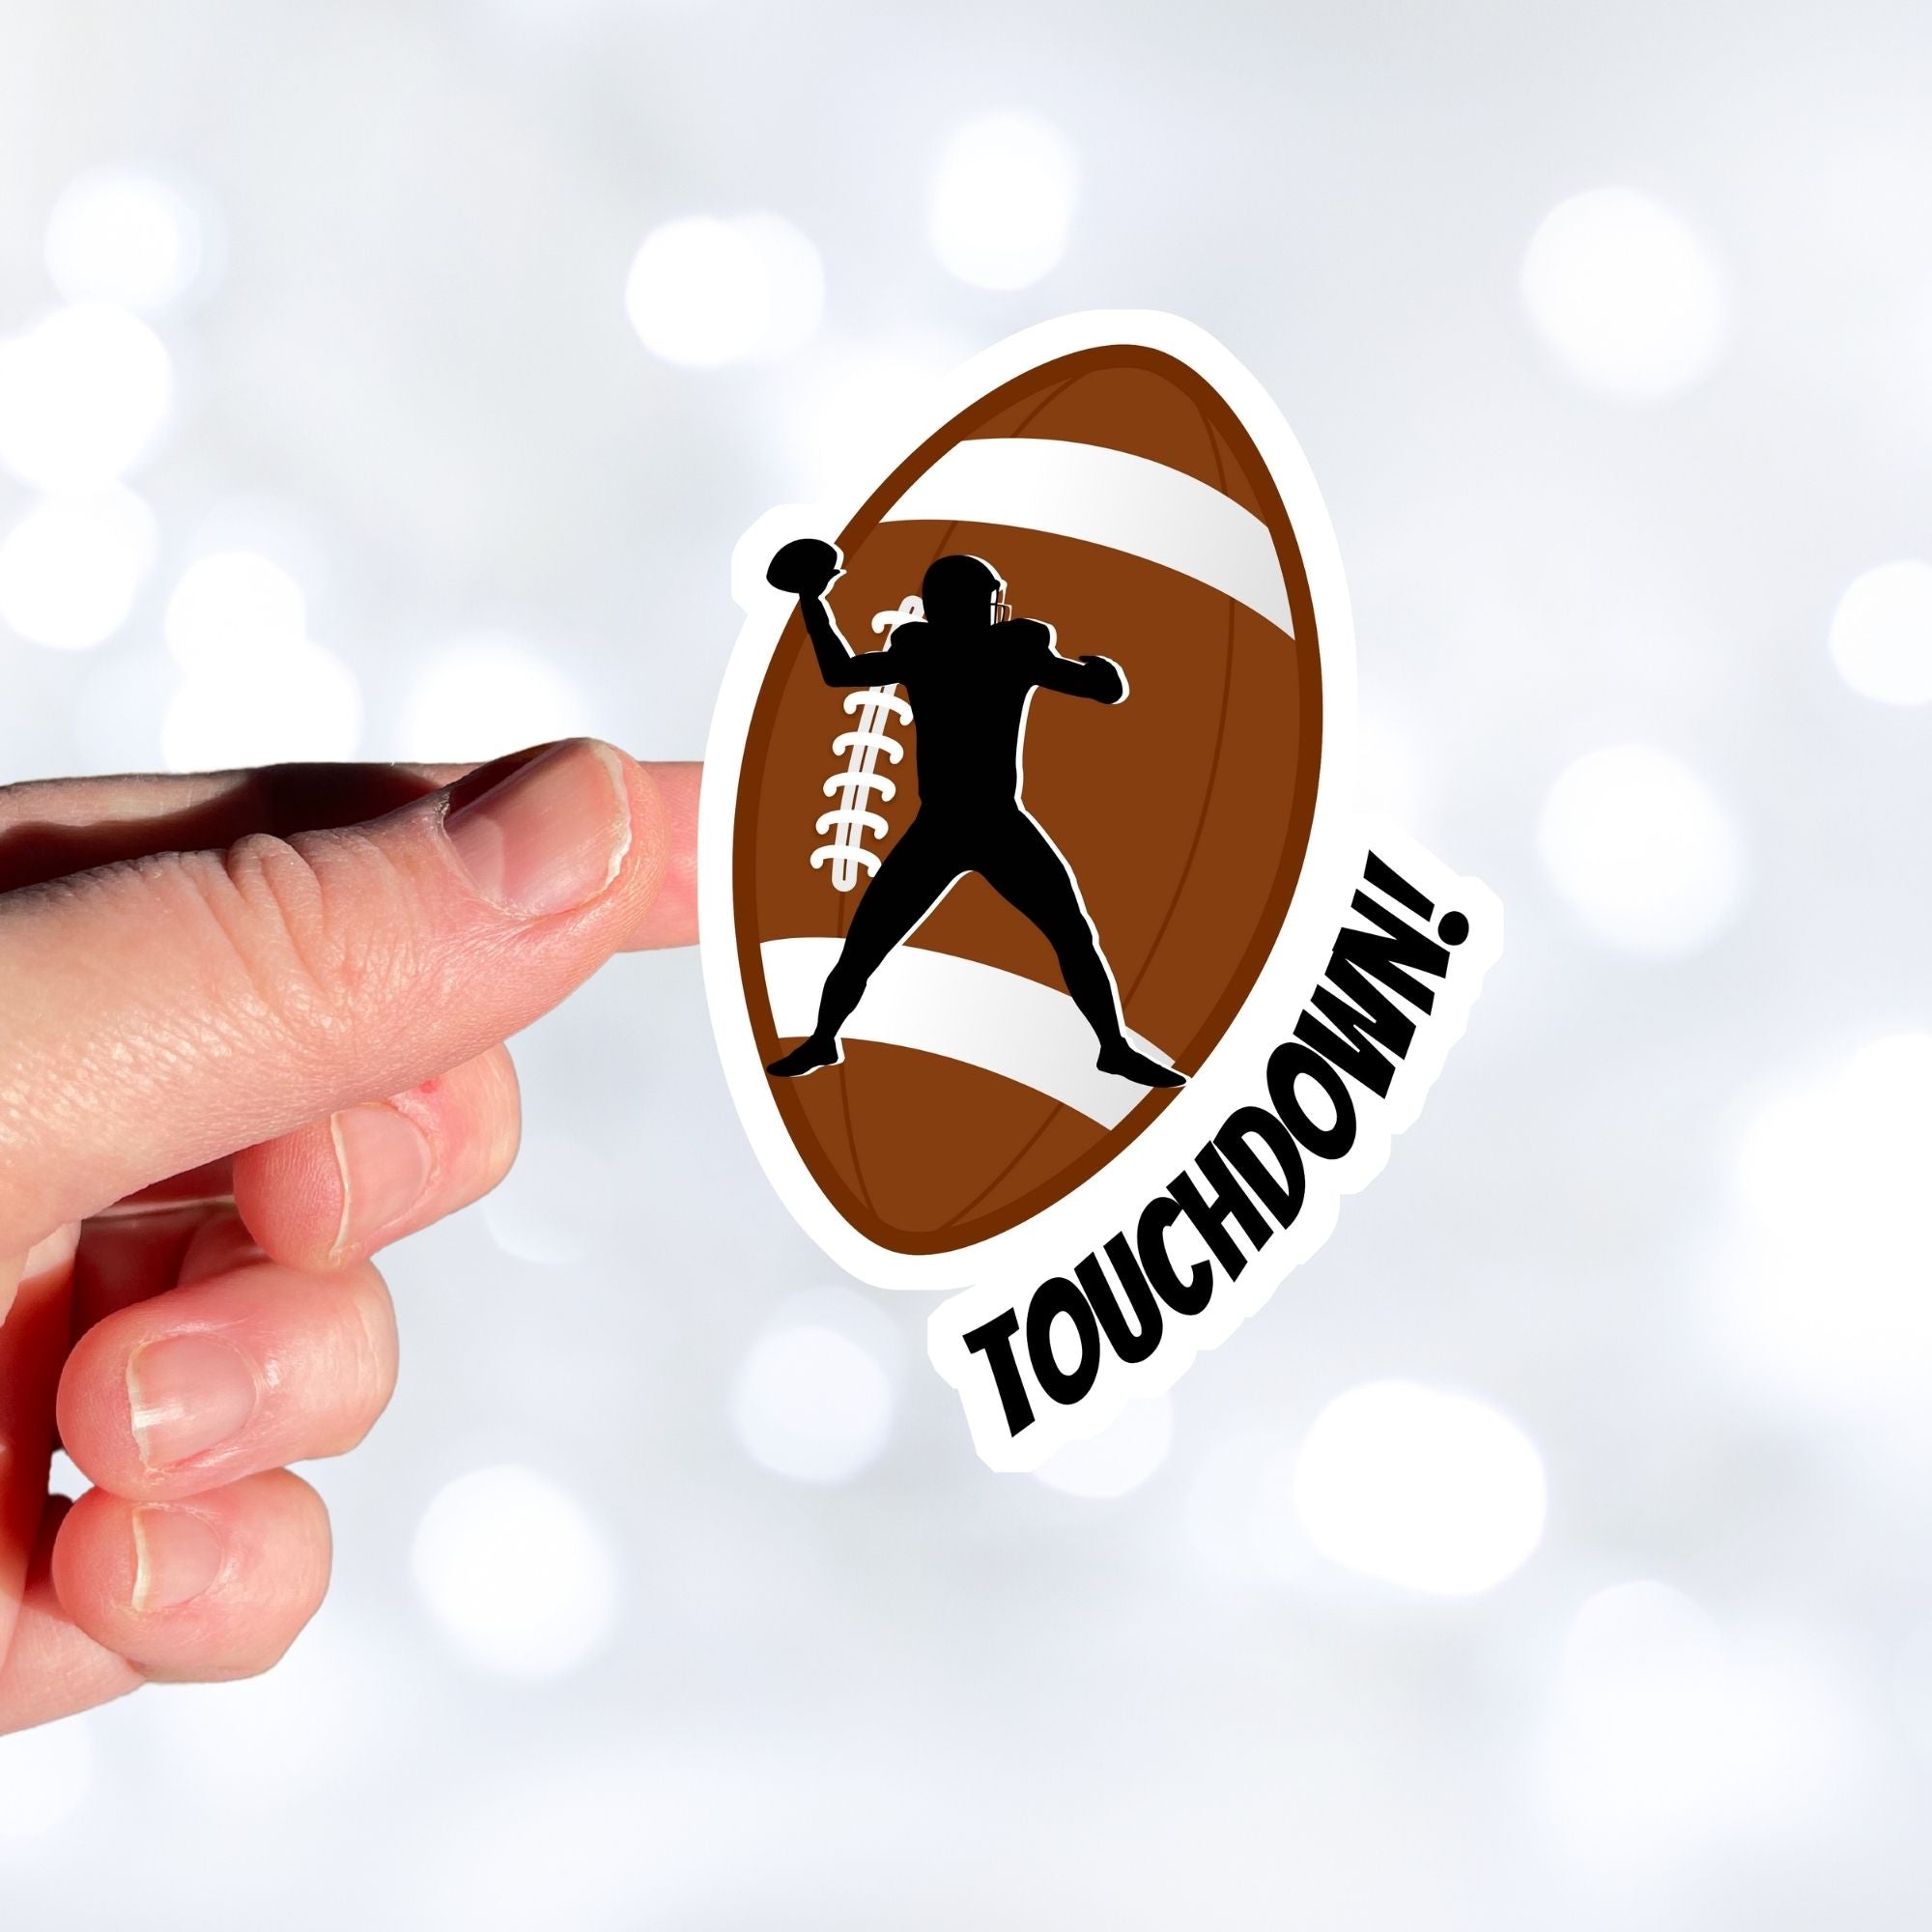 This individual die-cut sticker features the silhouette of a football (American) player about to pass the ball, on a football background, with the word "Touchdown!" on the lower right side. This image shows a hand holding the touchdown sticker.